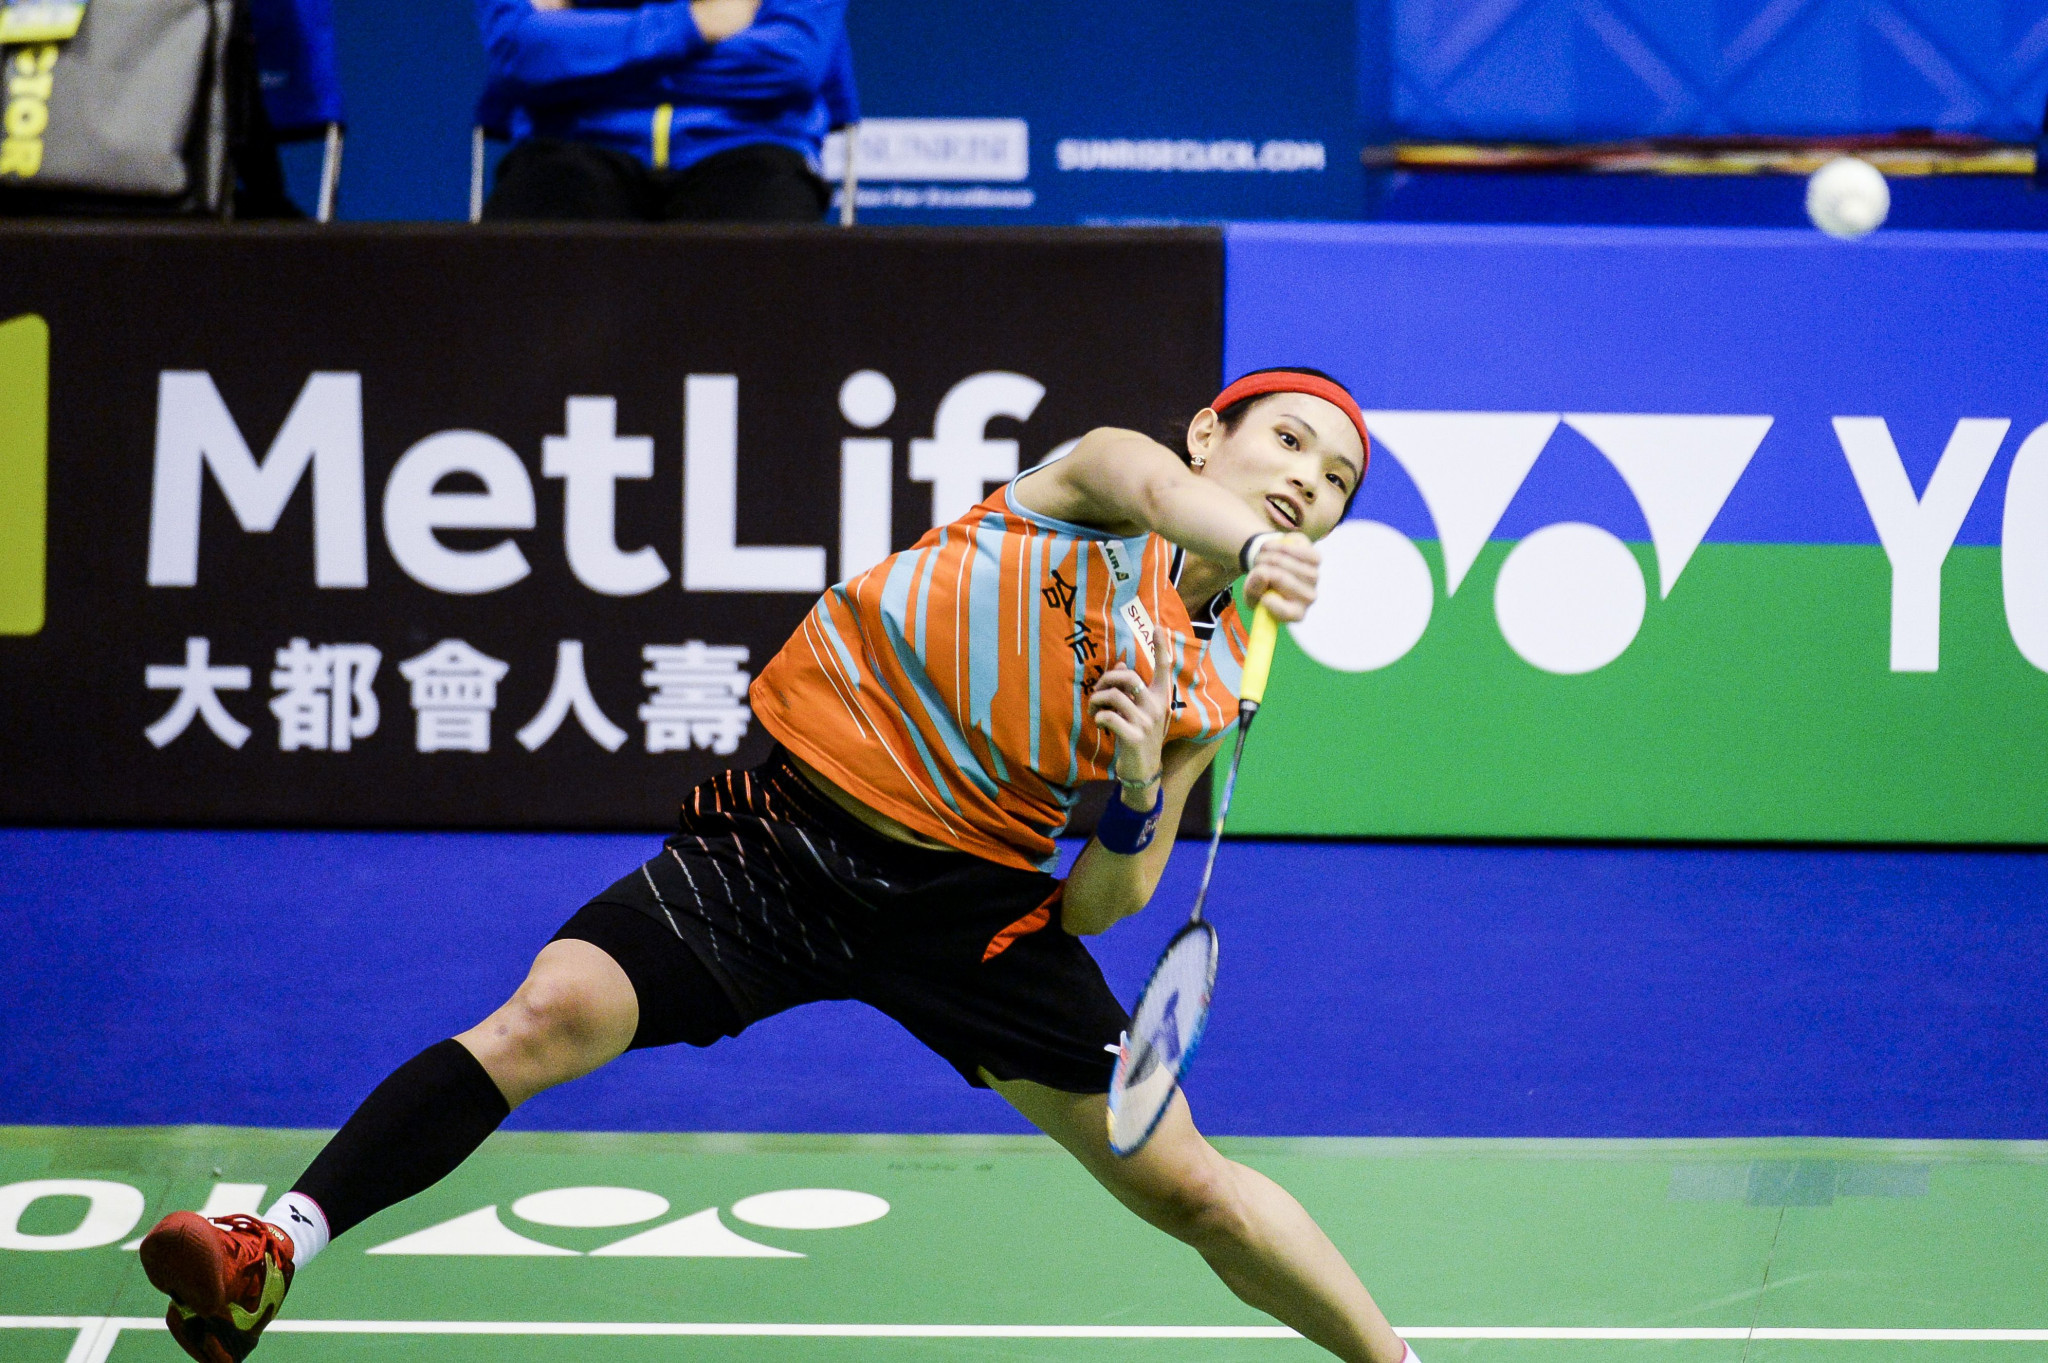 Tai Tzu-ying once again put in an imperious performance on day three of the Yonex-Sunrise Hong Kong Open © Getty Images